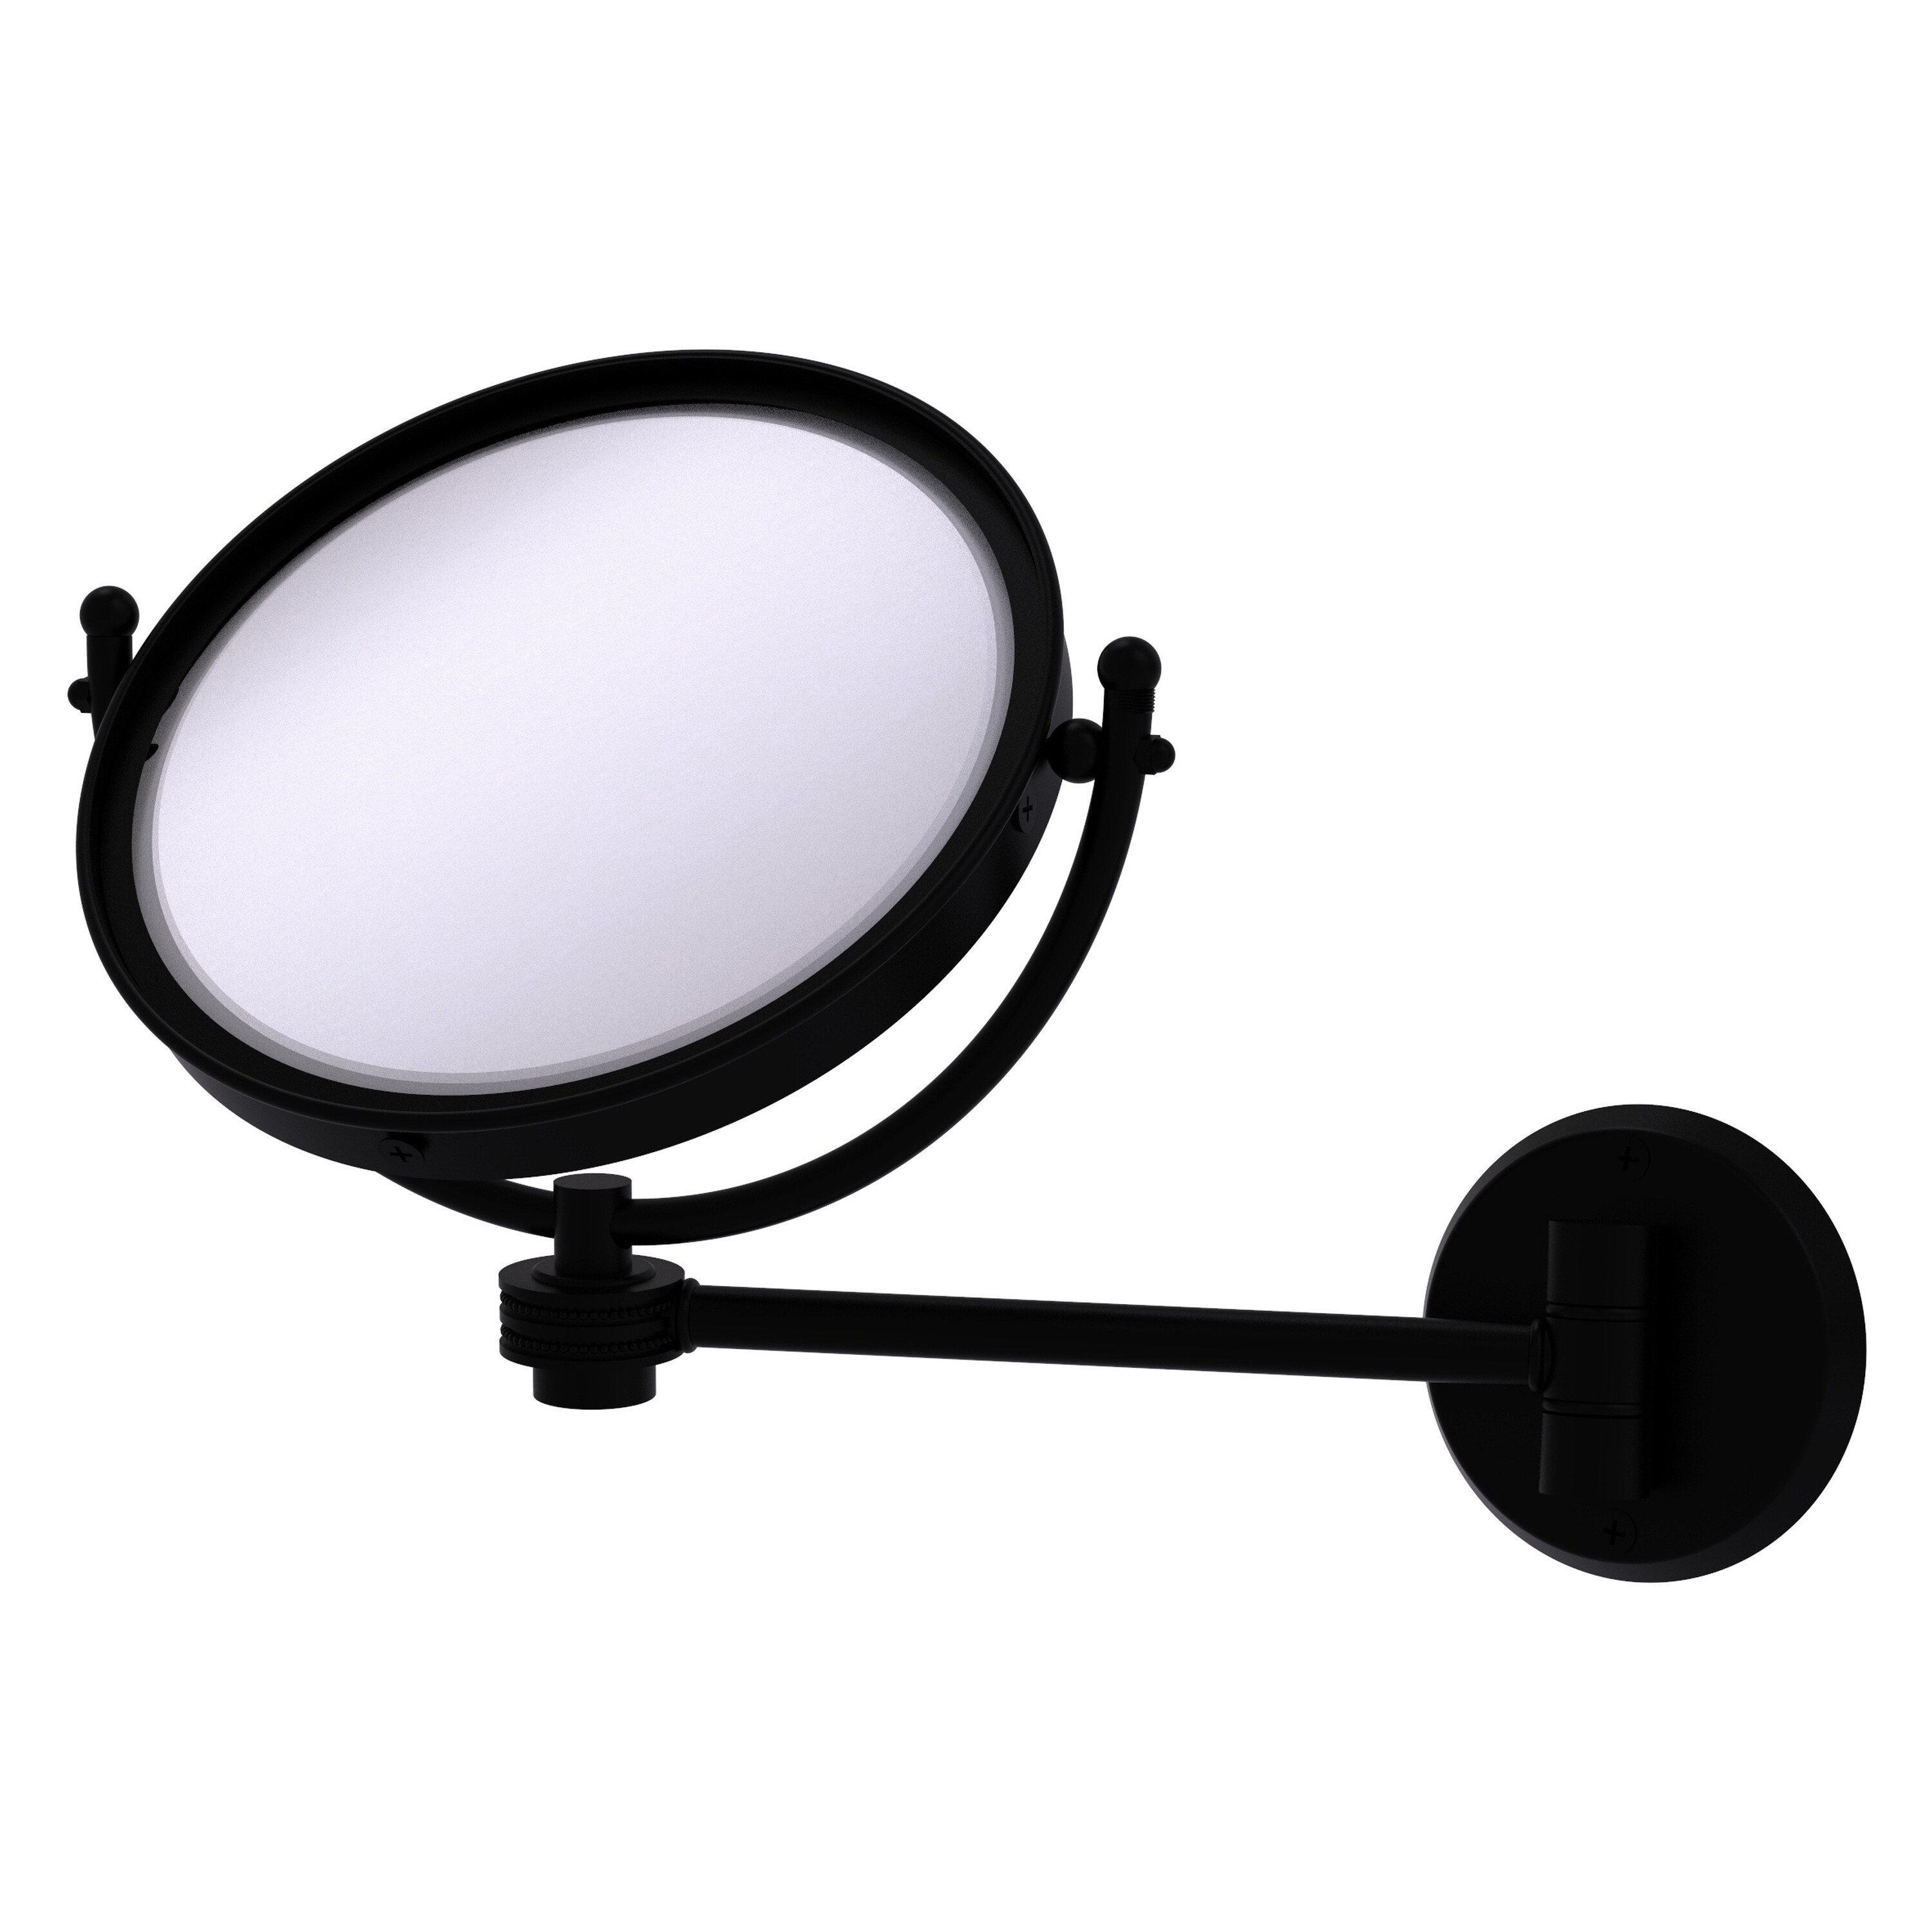 8-in x 10-in Matte Gray Double-sided 5X Magnifying Wall-mounted Vanity Mirror | - Allied Brass WM-5D/4X-BKM